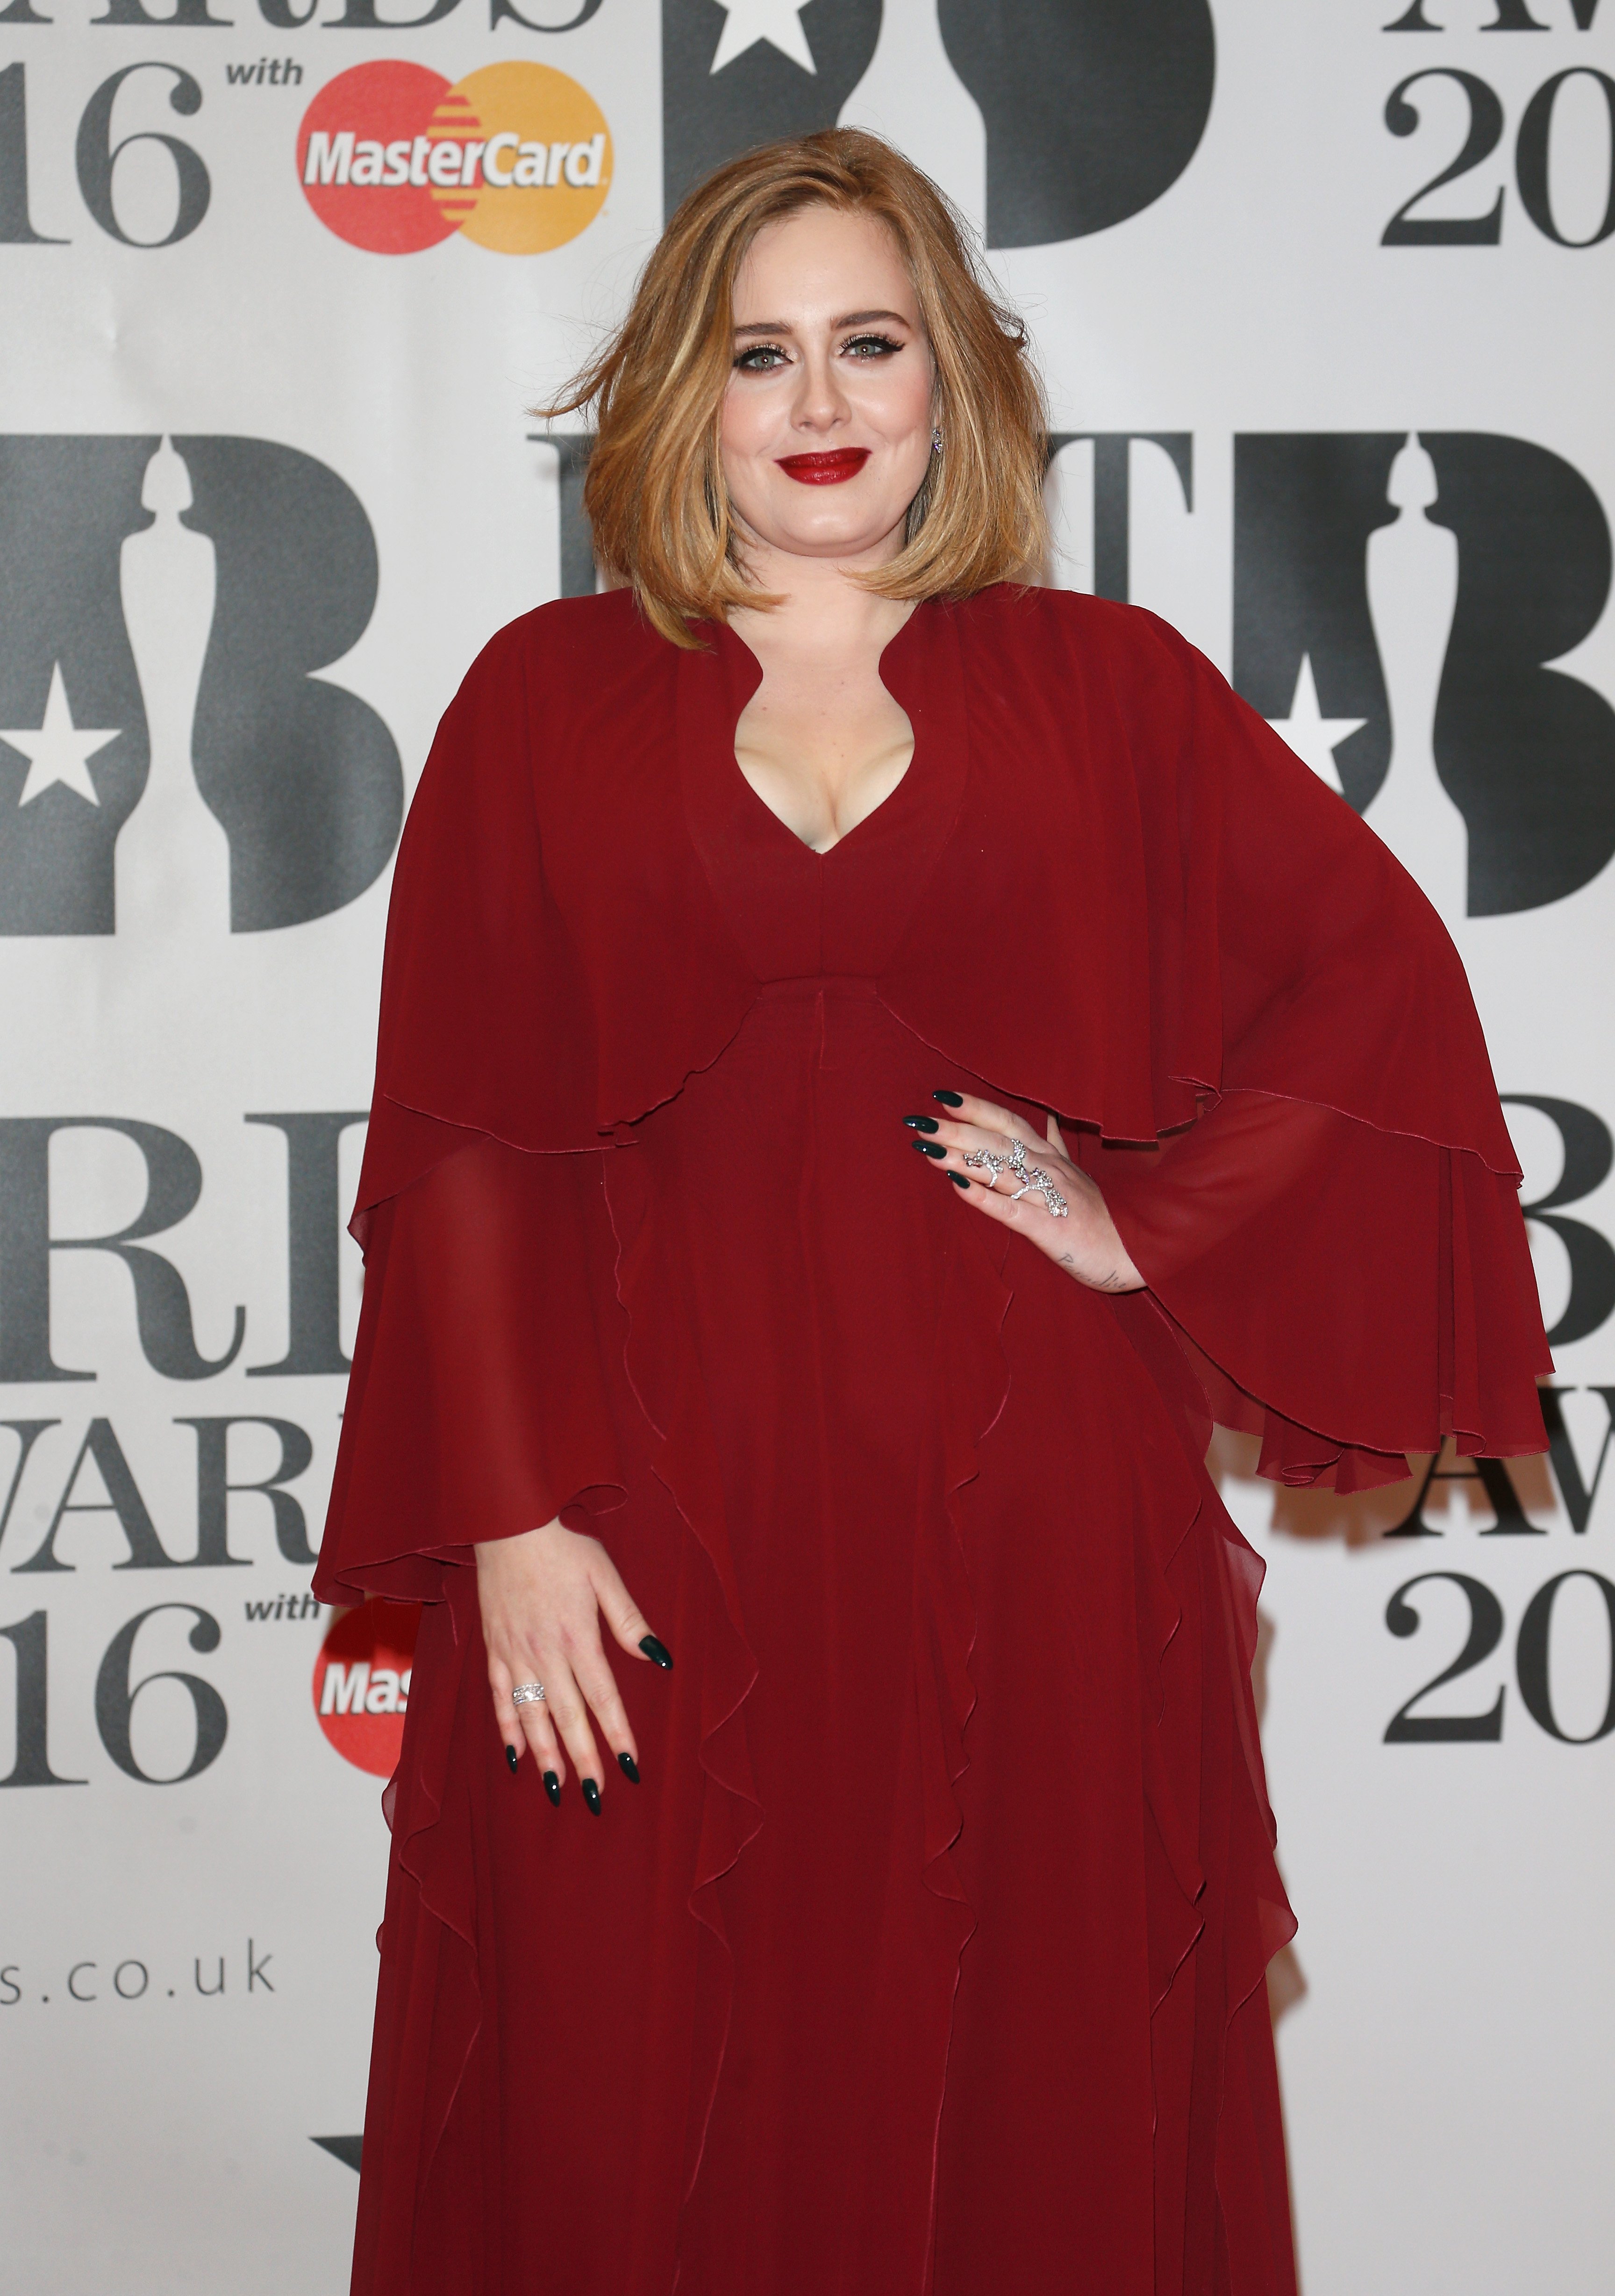 Adele attends the BRIT Awards 2016 at The O2 Arena on February 24, 2016| Photo: Getty Images